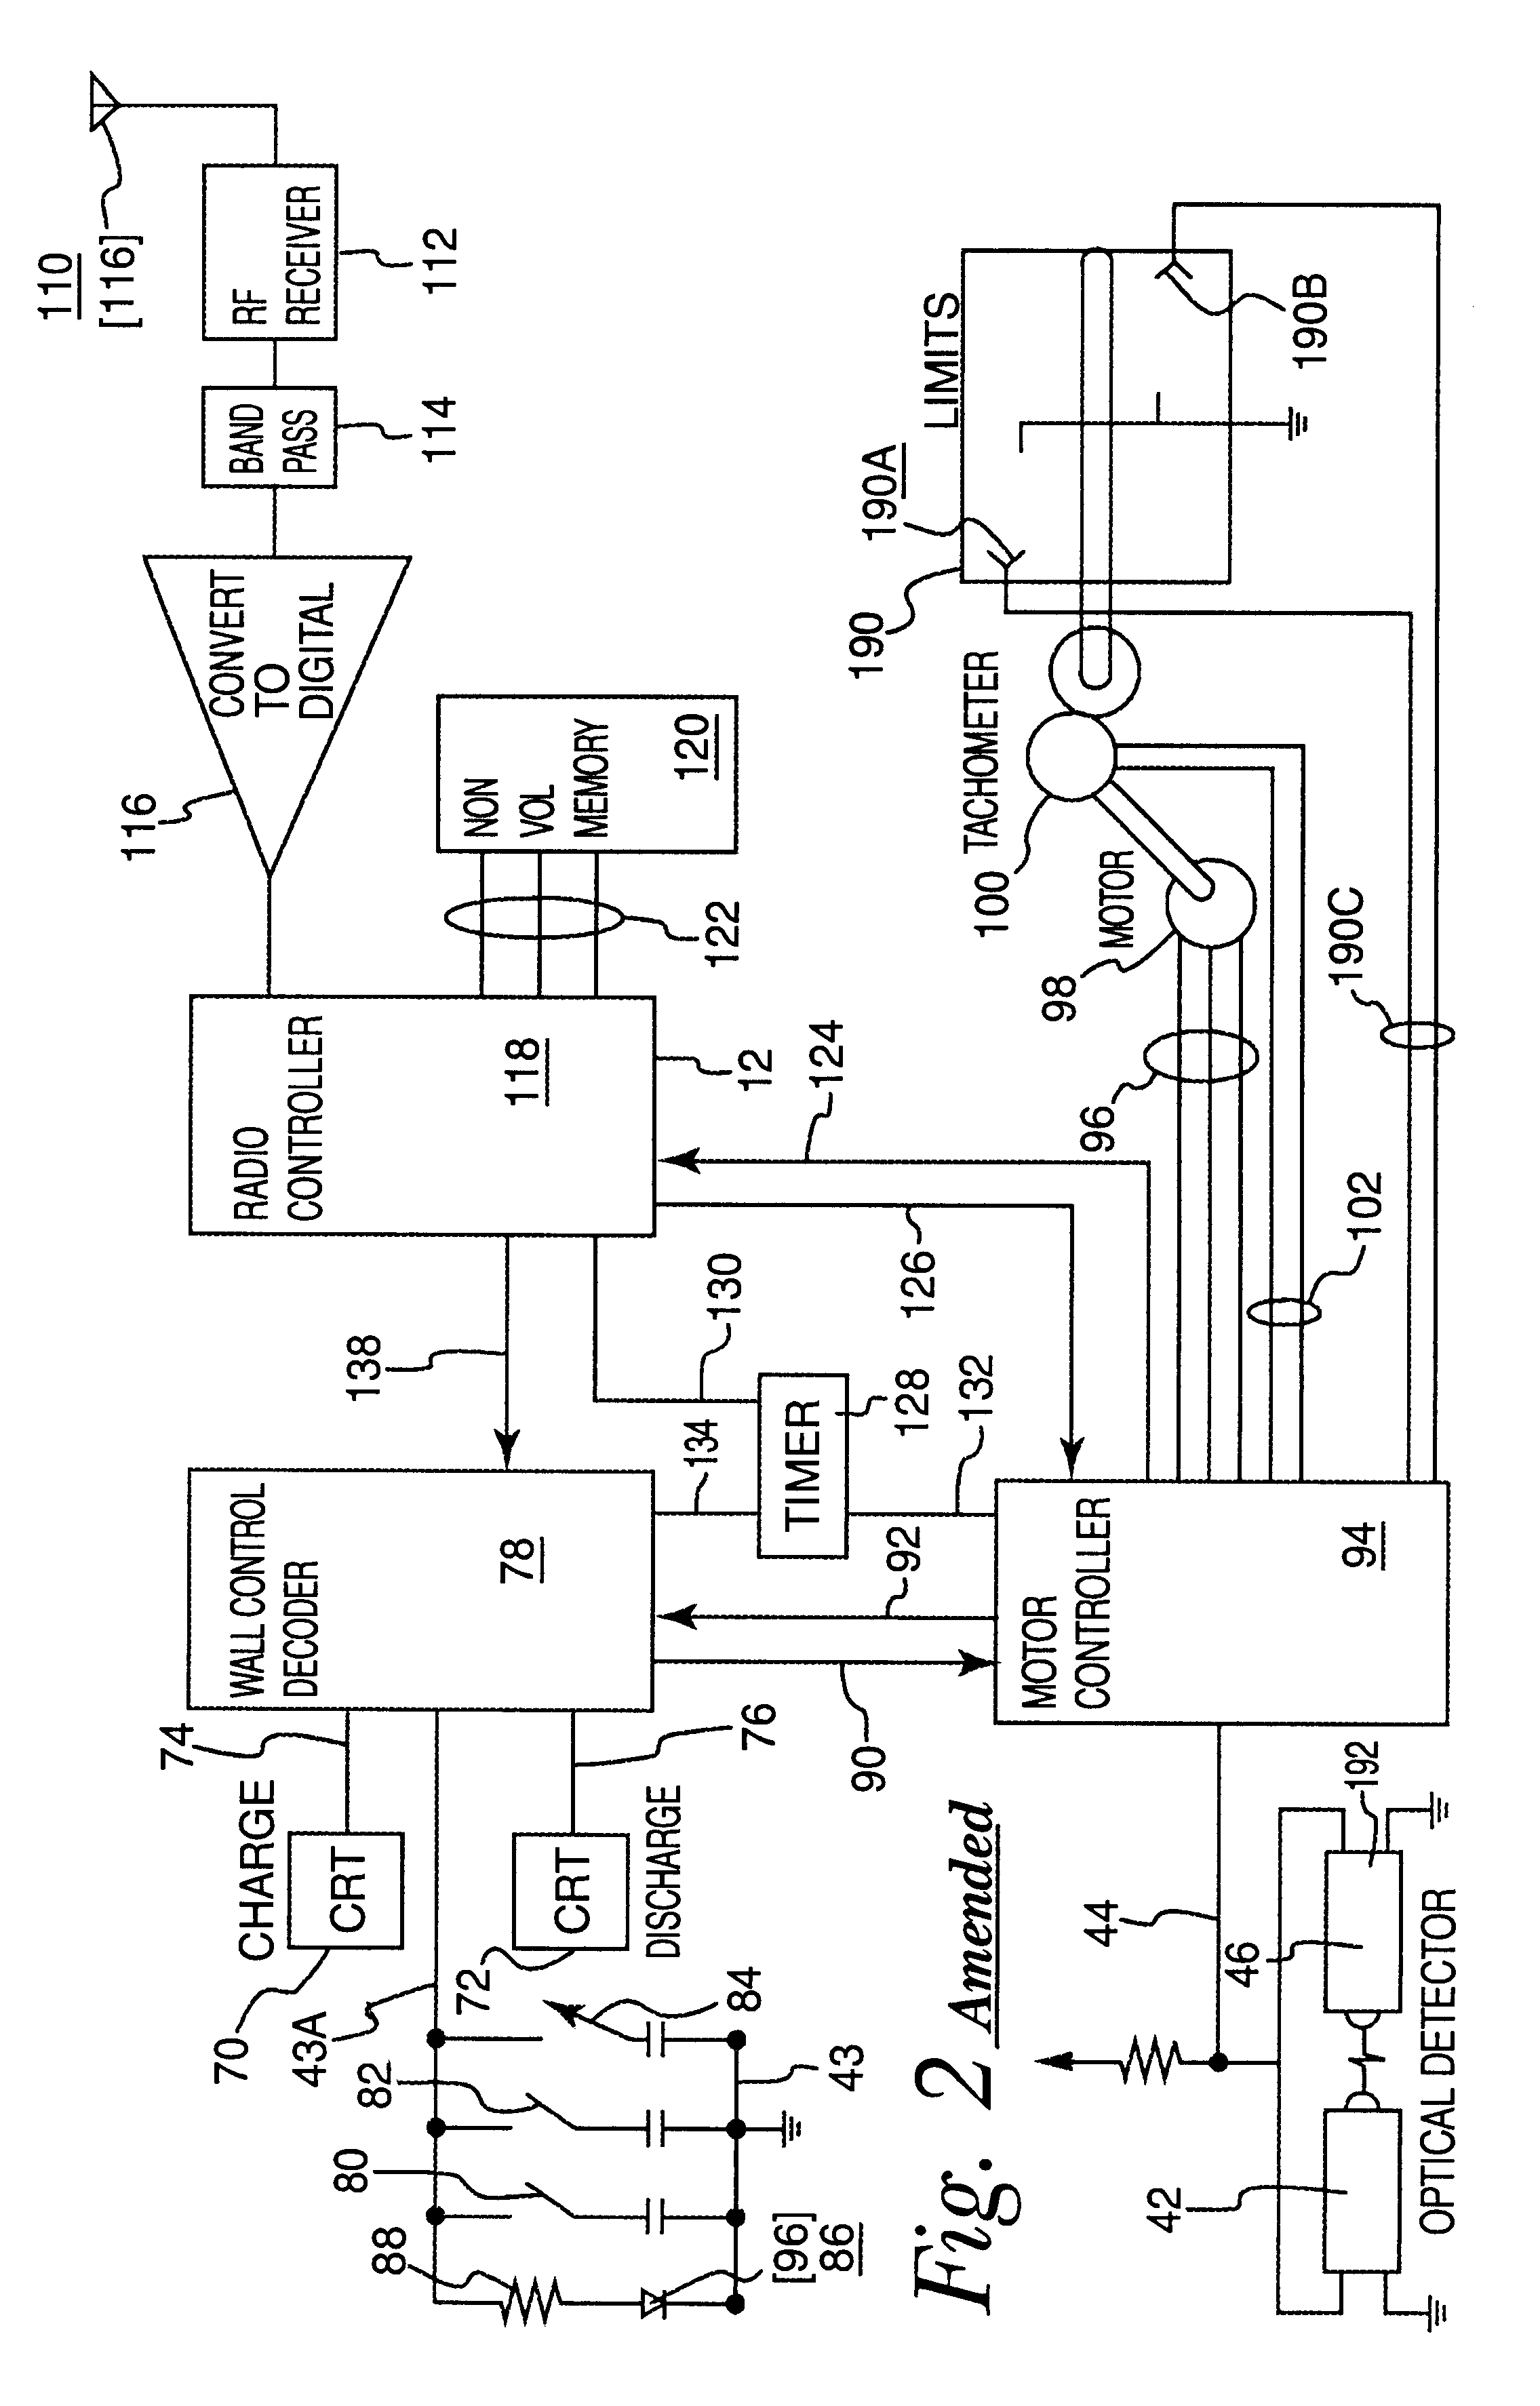 Barrier operator having system for detecting attempted forced entry